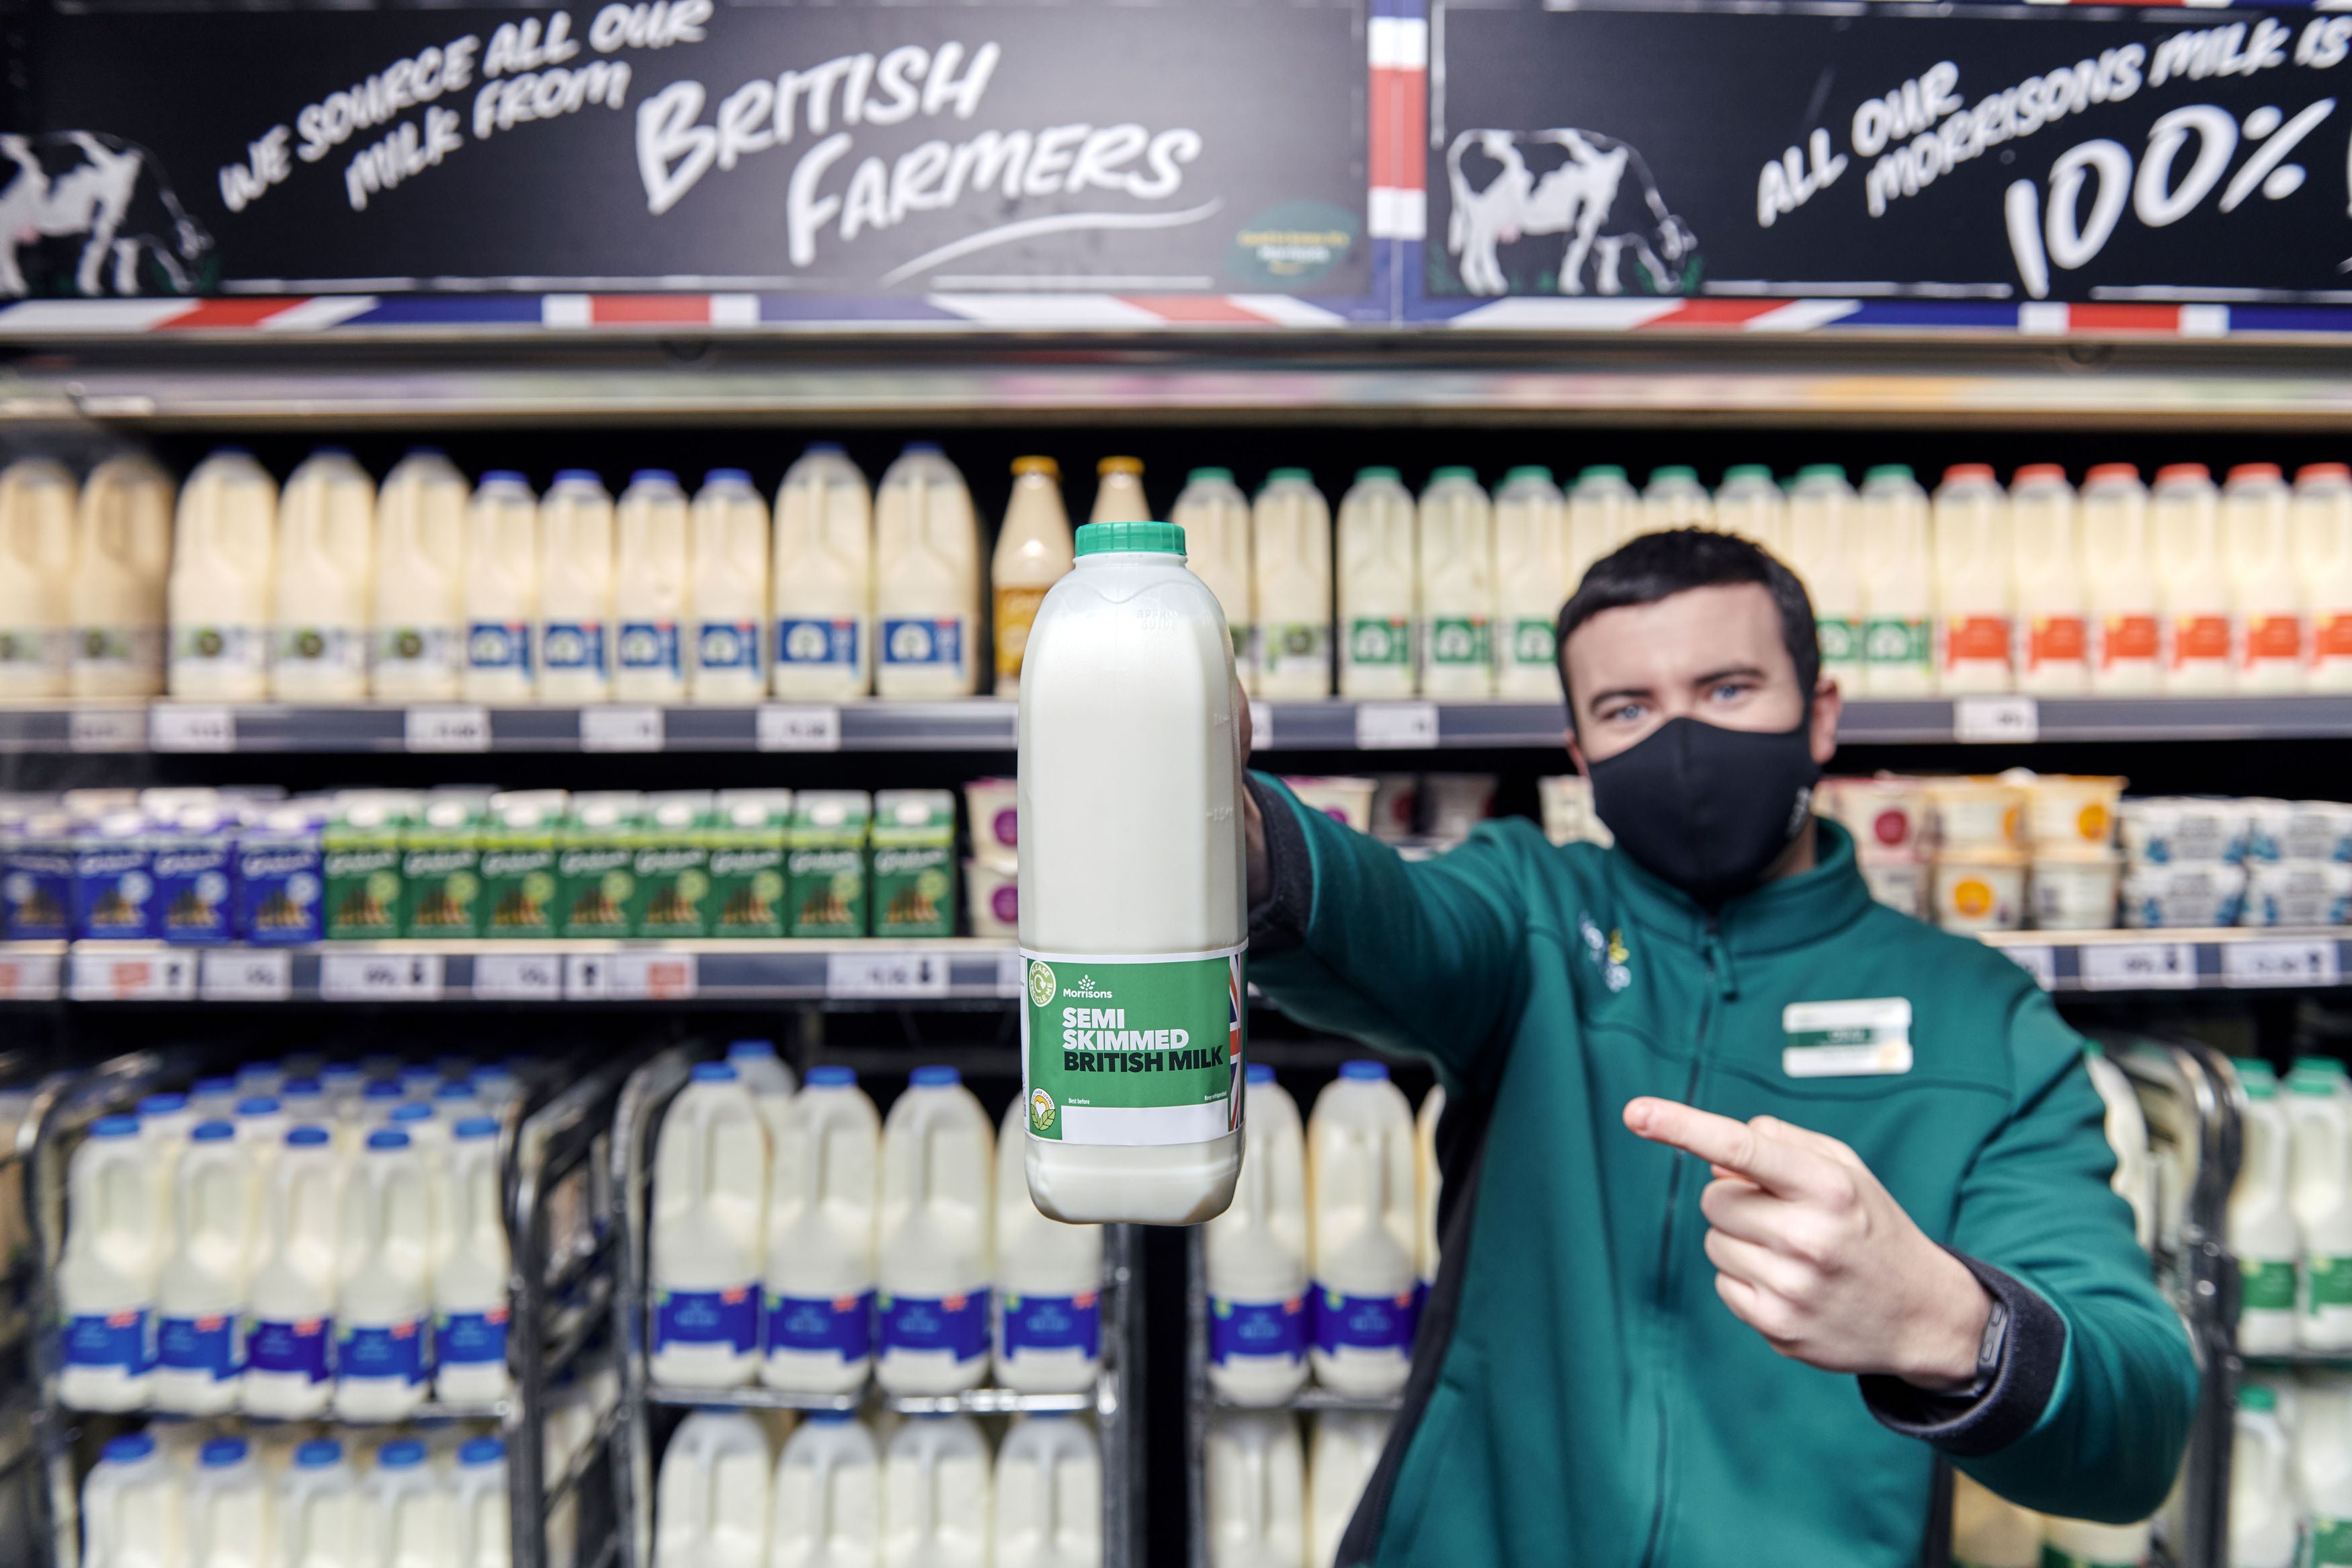 From the end of January, the retailer will instead place "best before" dates on 90 per cent of its own-brand milk